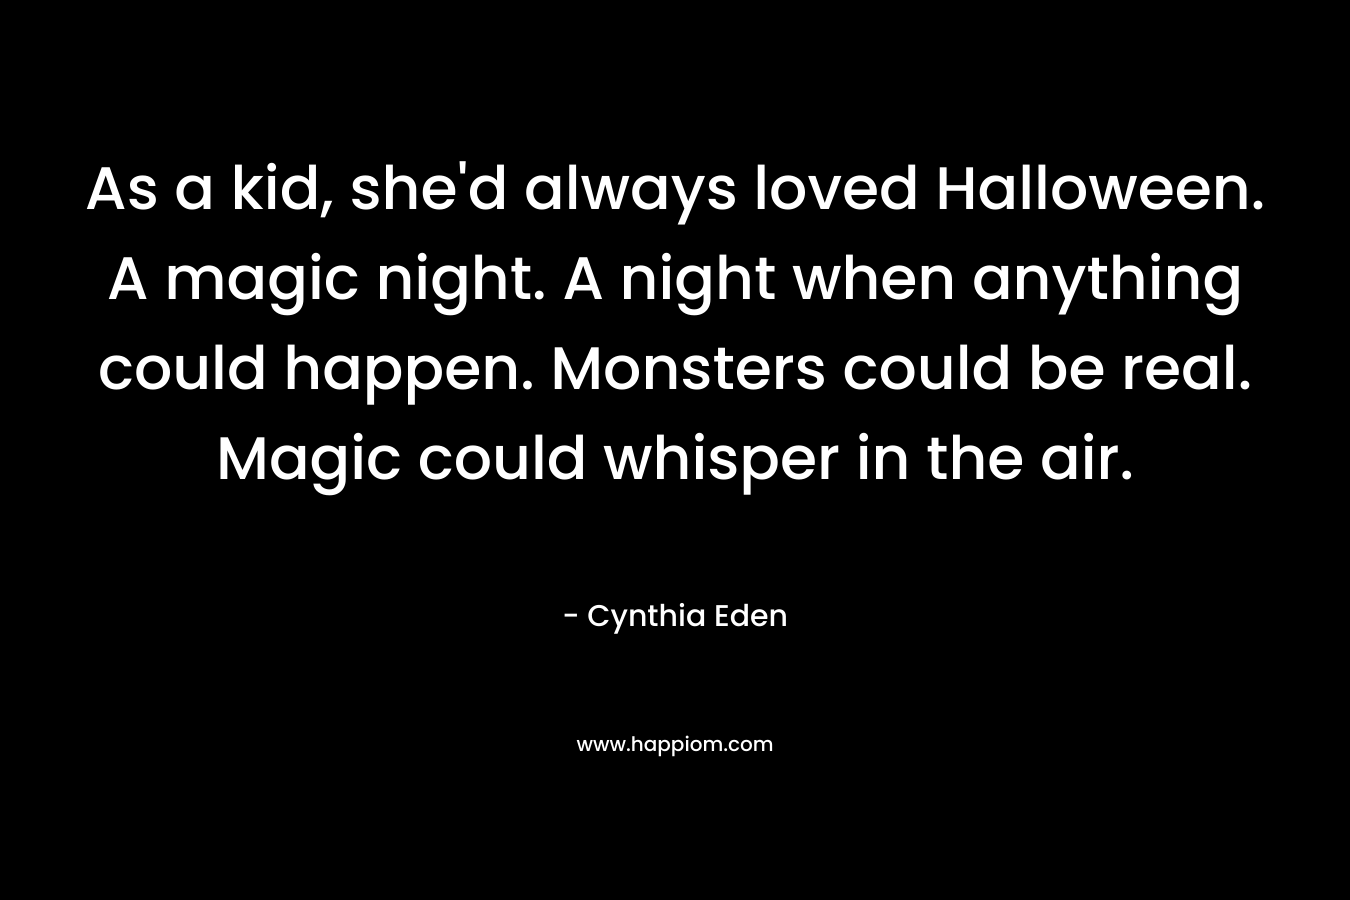 As a kid, she’d always loved Halloween. A magic night. A night when anything could happen. Monsters could be real. Magic could whisper in the air. – Cynthia Eden